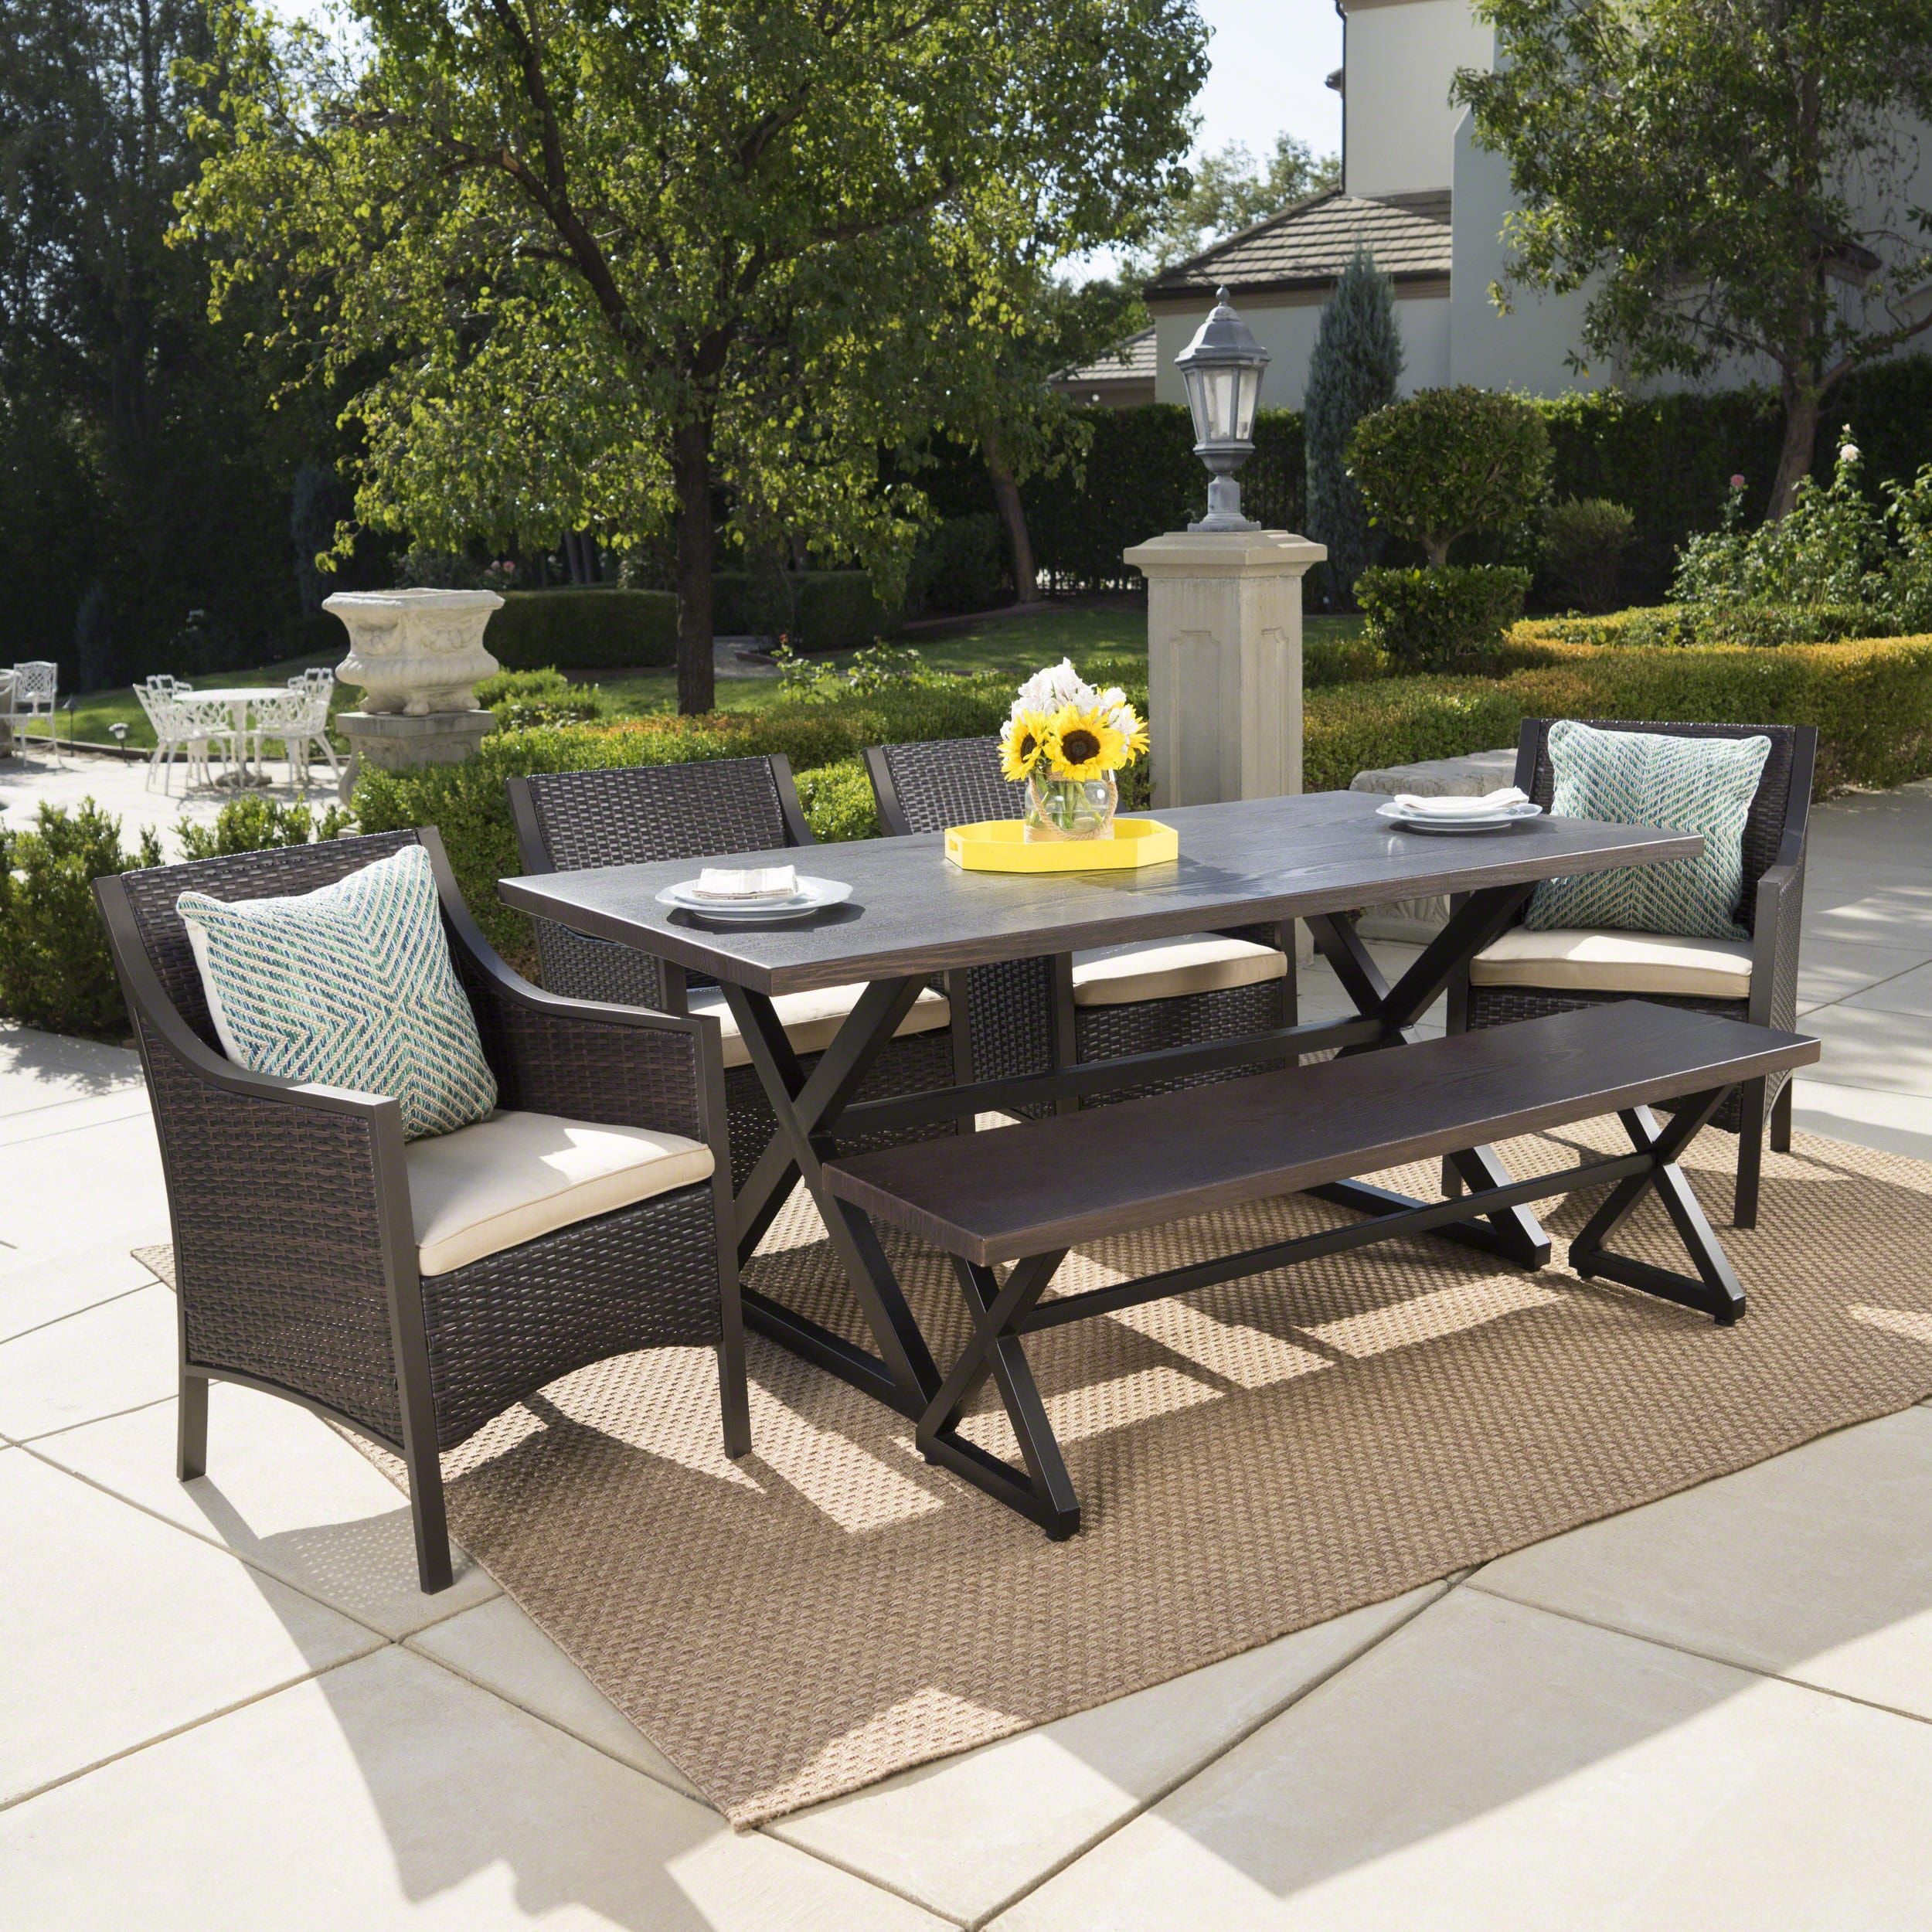 Liona Outdoor 6 Piece Rectangle Aluminum Wicker Dining Set With Intended For Dark Brown 6 Piece Patio Dining Sets (View 12 of 15)